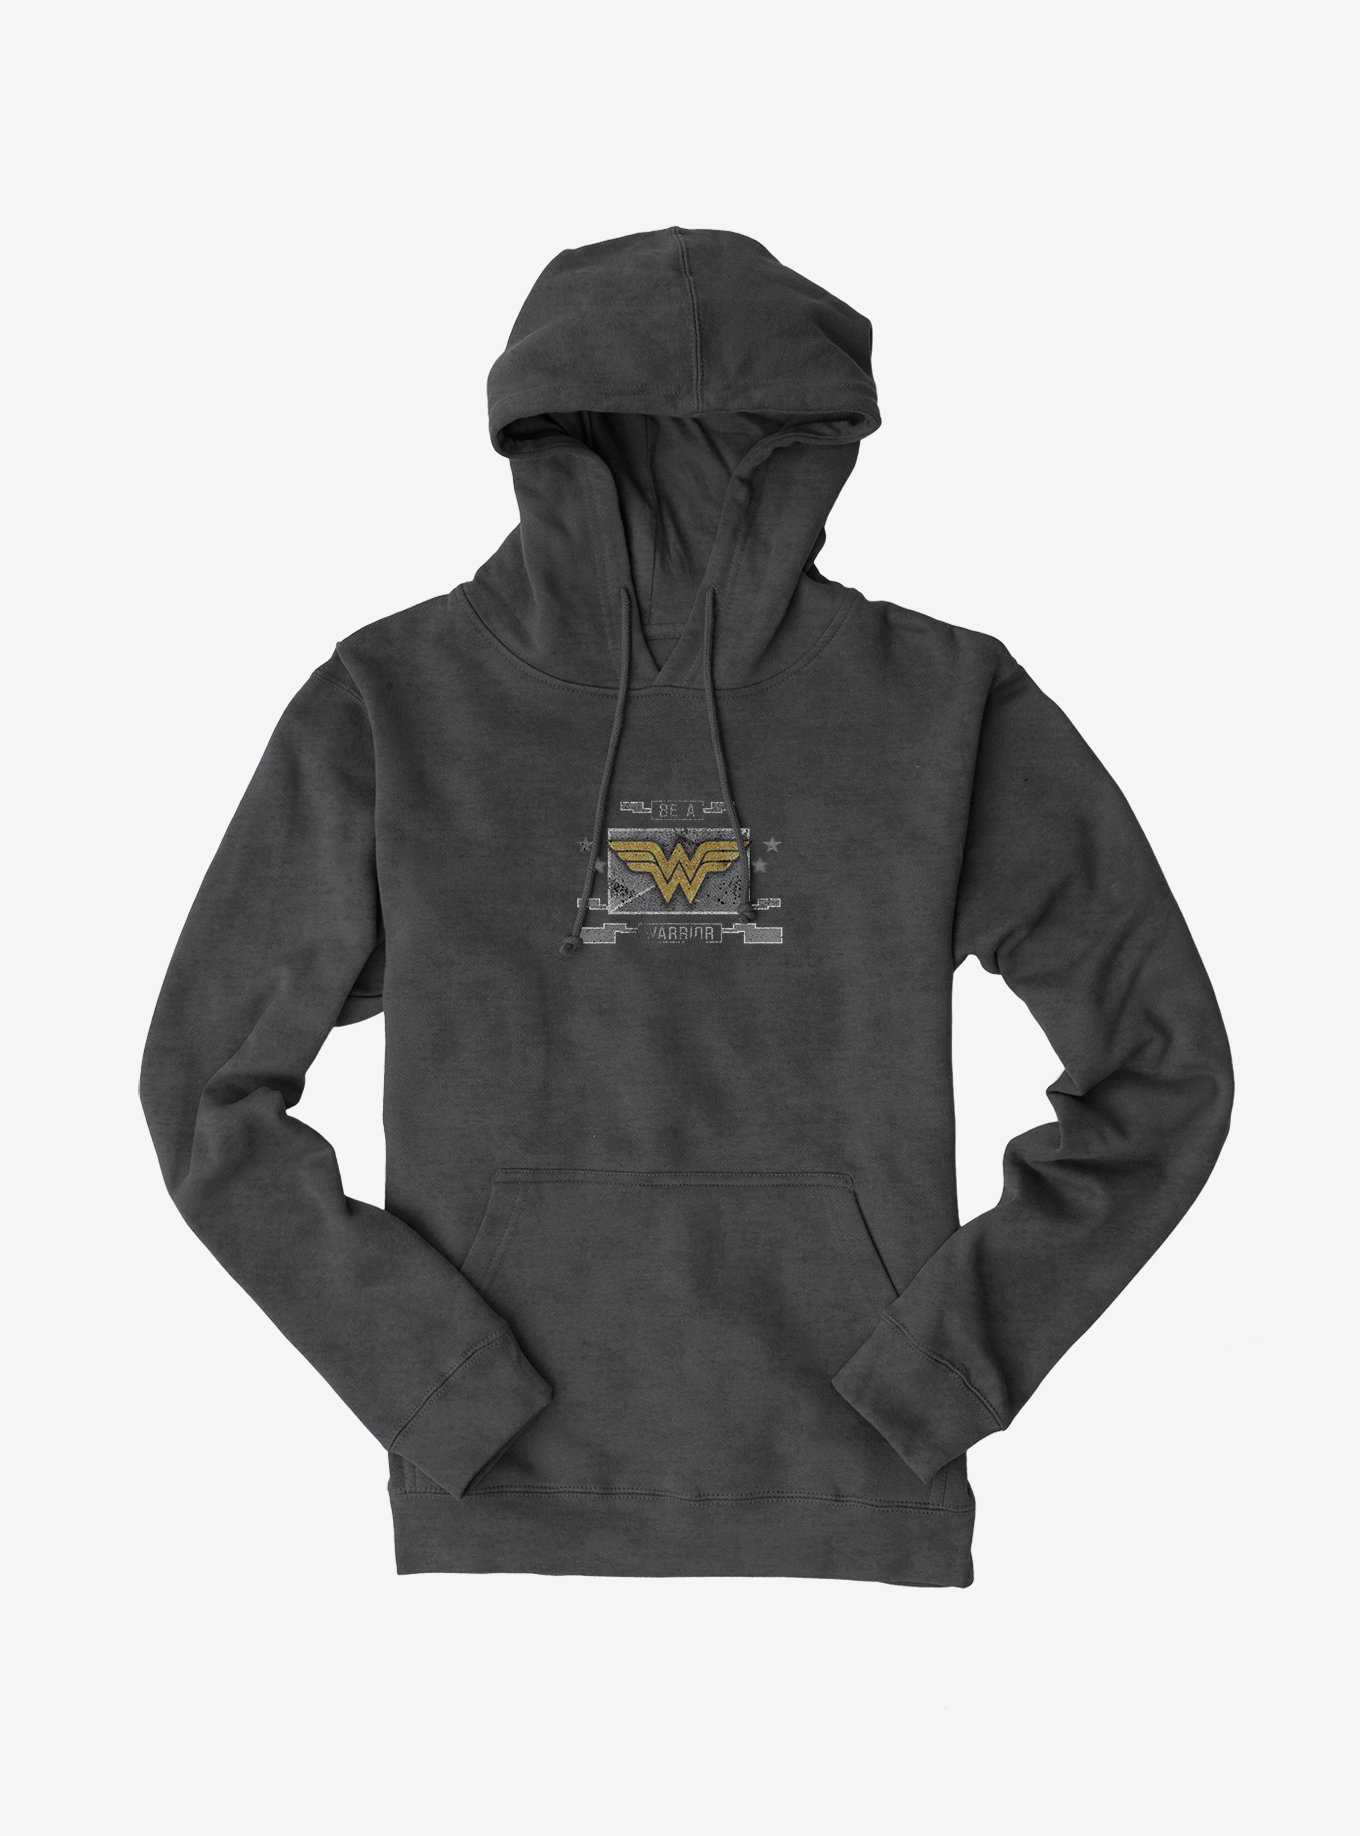 WONDER WOMAN Ladies' Pullover Hooded Sweatshirt – Just for laughs and shitz